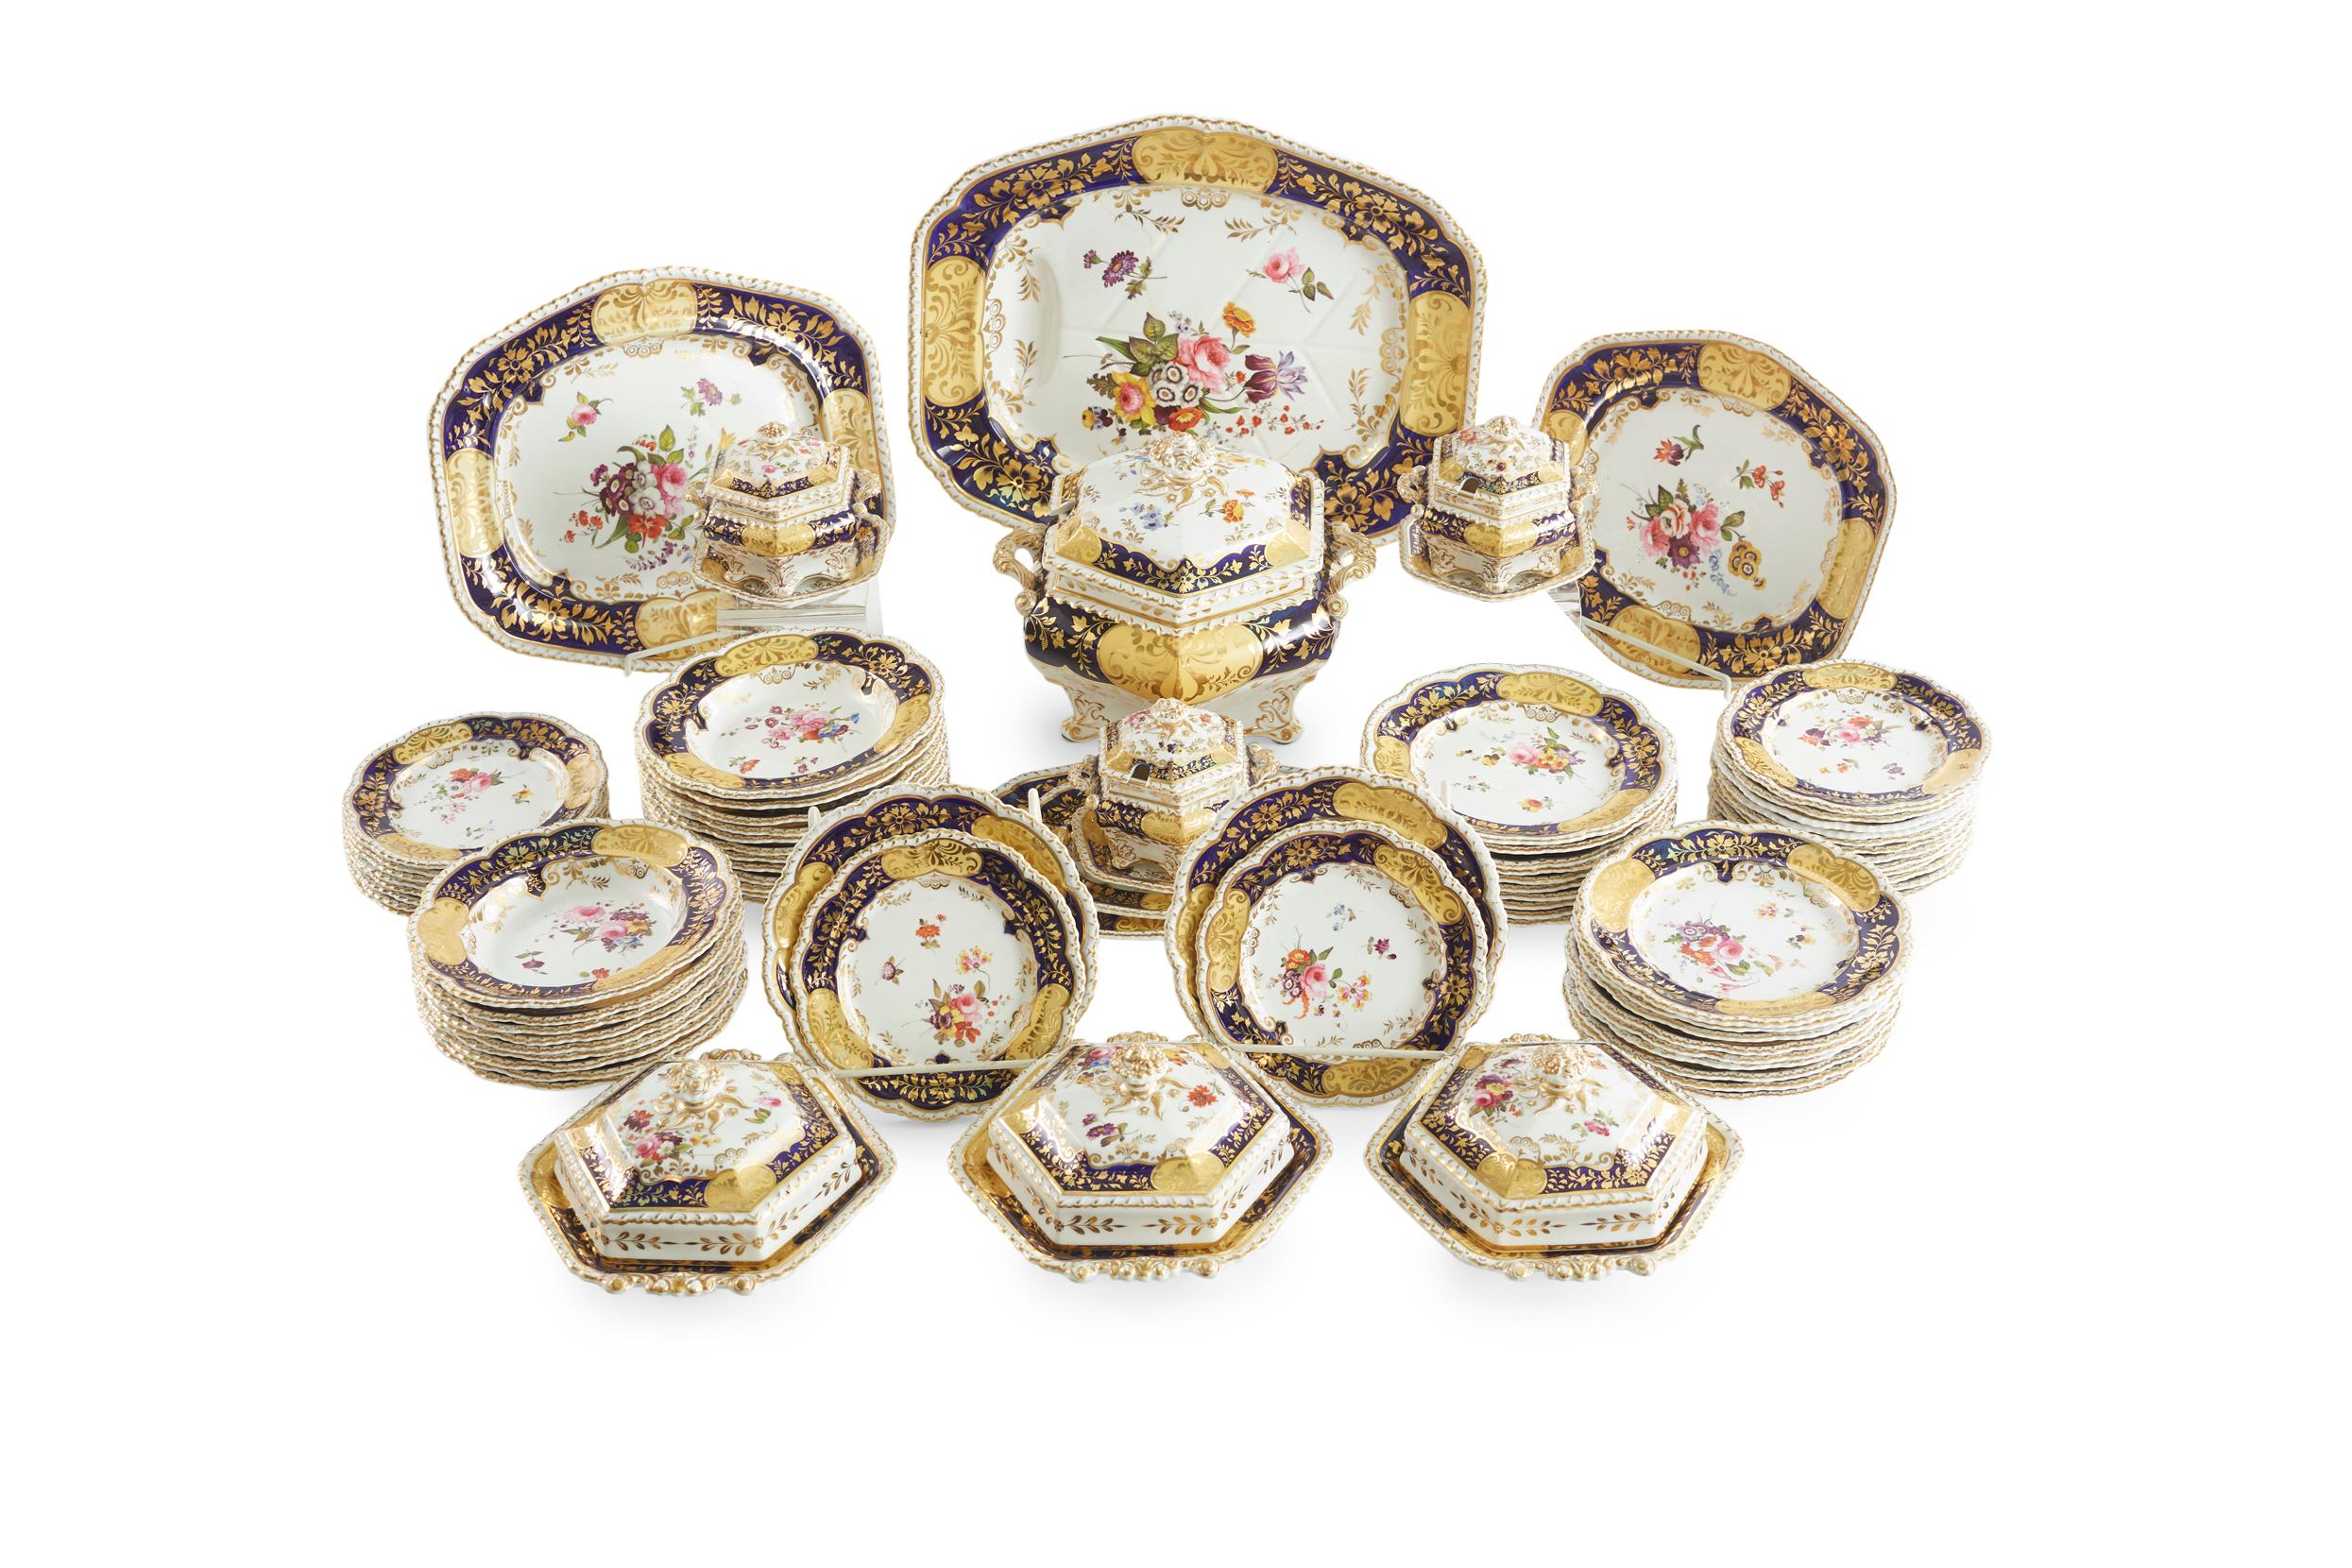 Mid 19th Century British porcelain dinnerware service with hand painted gilt foliate borders with bouquets of wild flowers against a white background design details. Each piece is in great antique condition. Minor wear consistent with age / use.